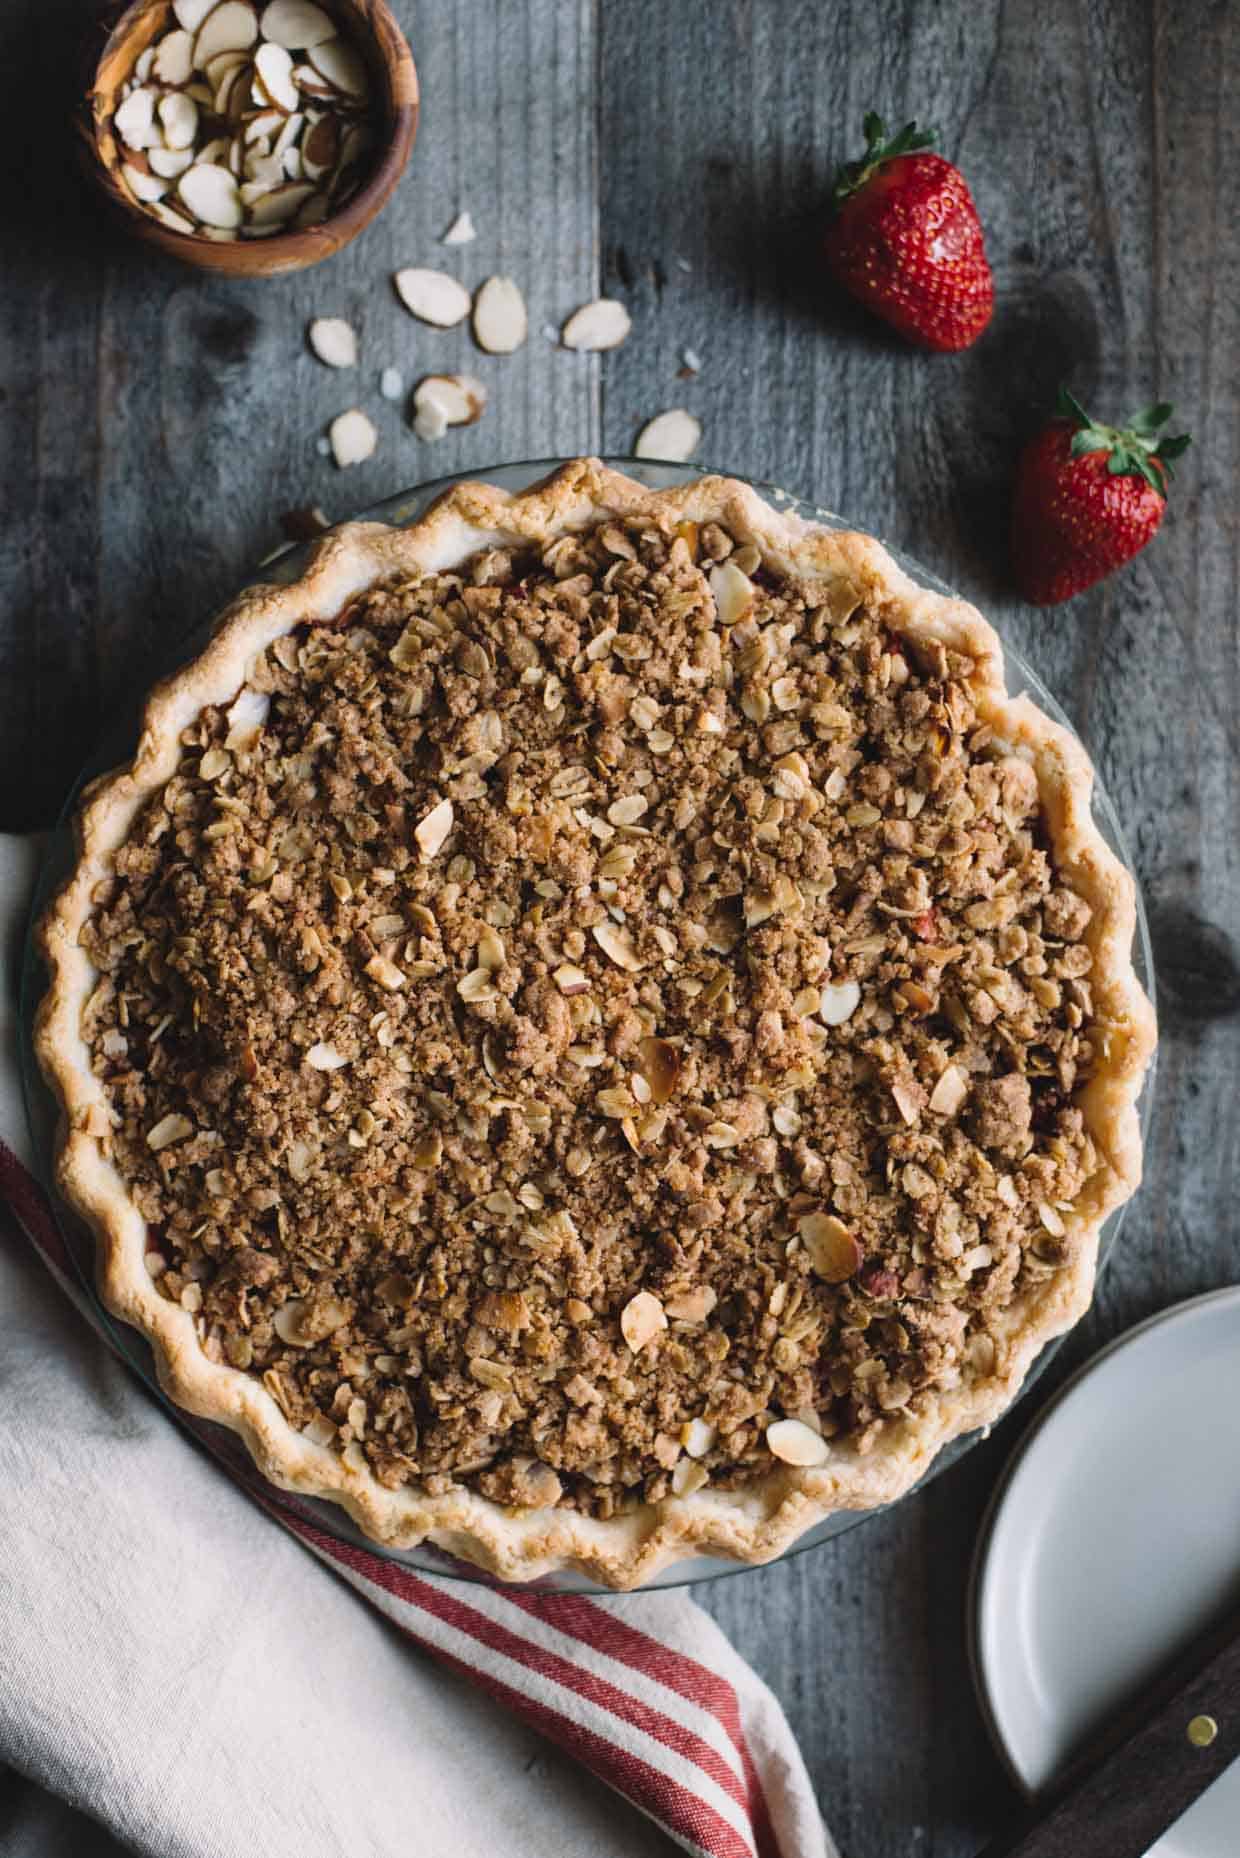 Gluten-Free Strawberry Rhubarb Pie with Crumb Topping - delicious spring pie by @lisalin8